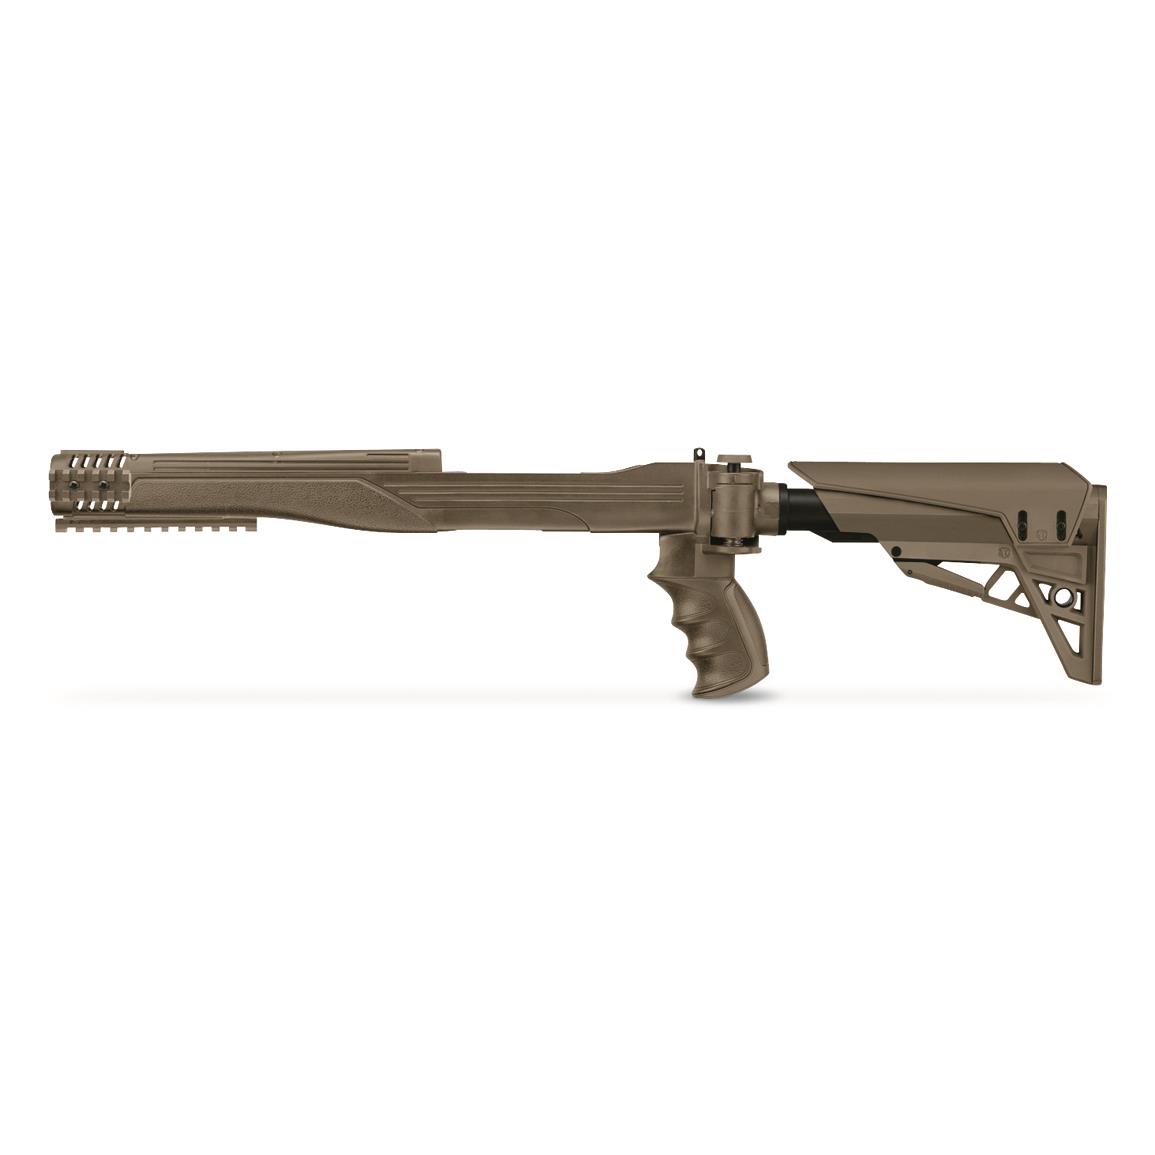 Ati Tactlite Strikeforce R22 Folding Rifle Stock For Ruger1022 Rifles